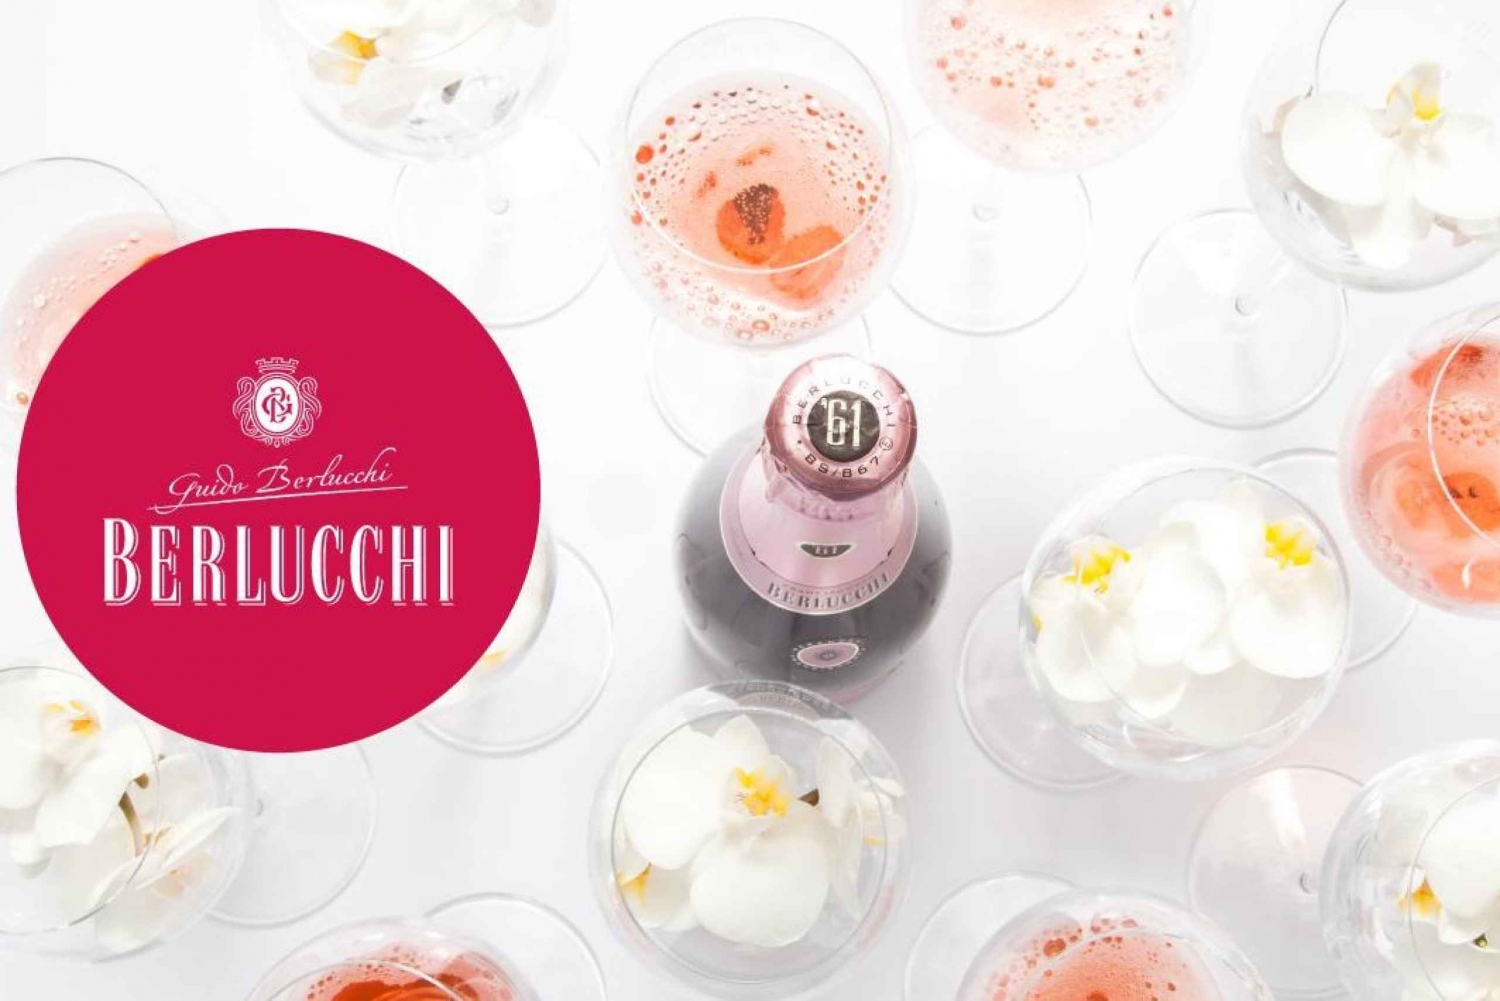 21 May - Berlucchi: excellence of Franciacorta